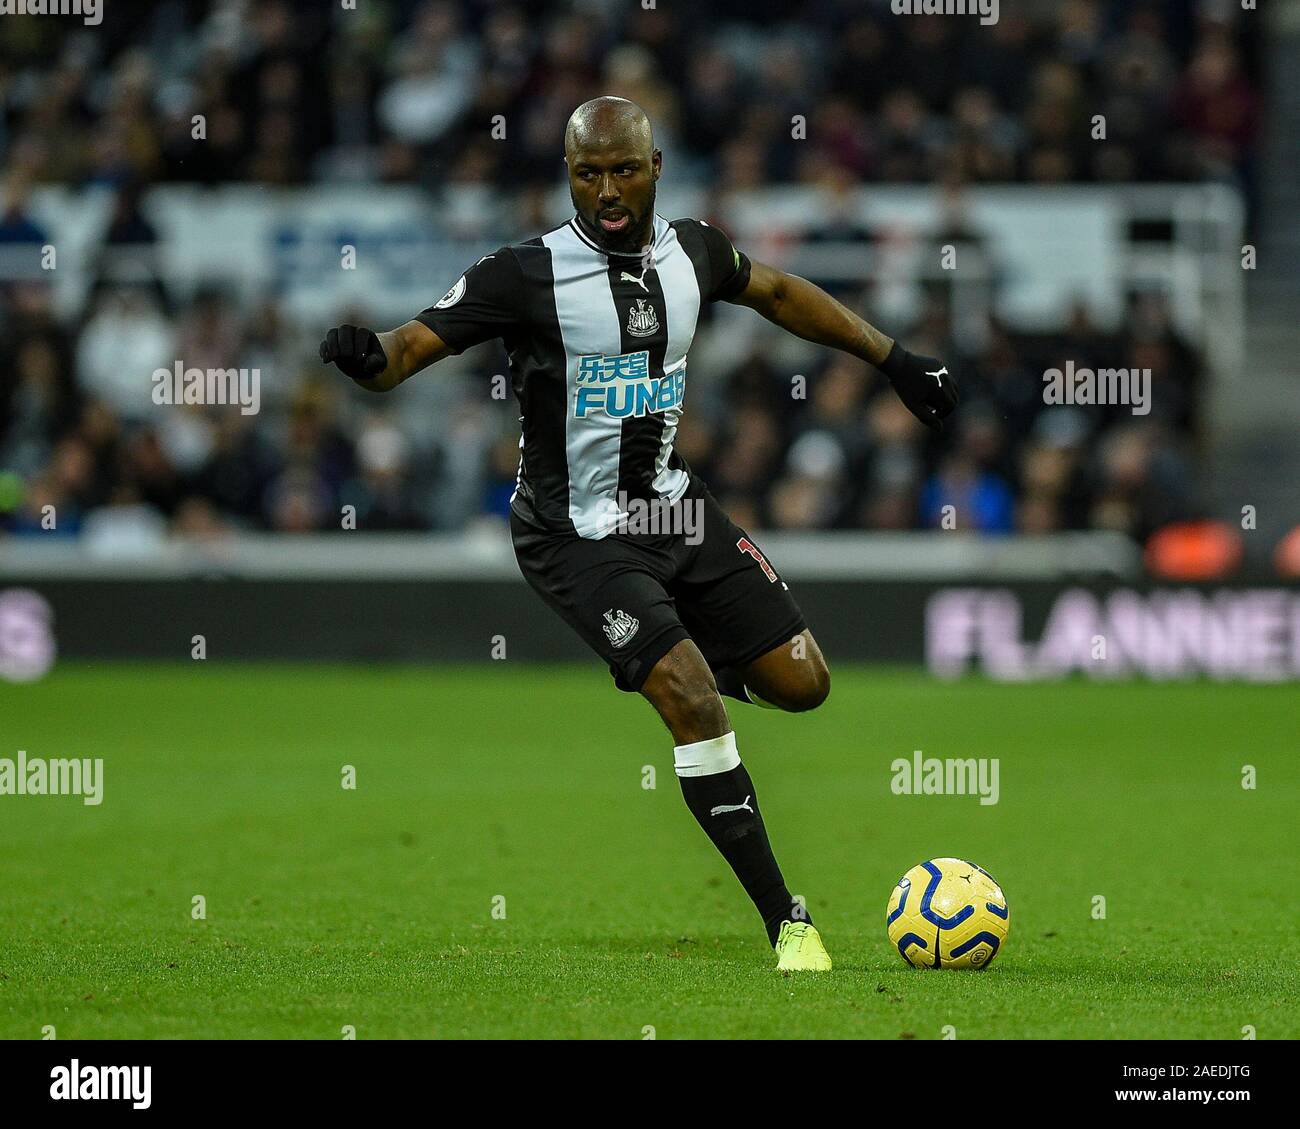 8th December 2019, St. James's Park, Newcastle, England; Premier League, Newcastle United v Southampton : Jetro Willems (15) of Newcastle United in action Credit: Iam Burn/News Images Stock Photo